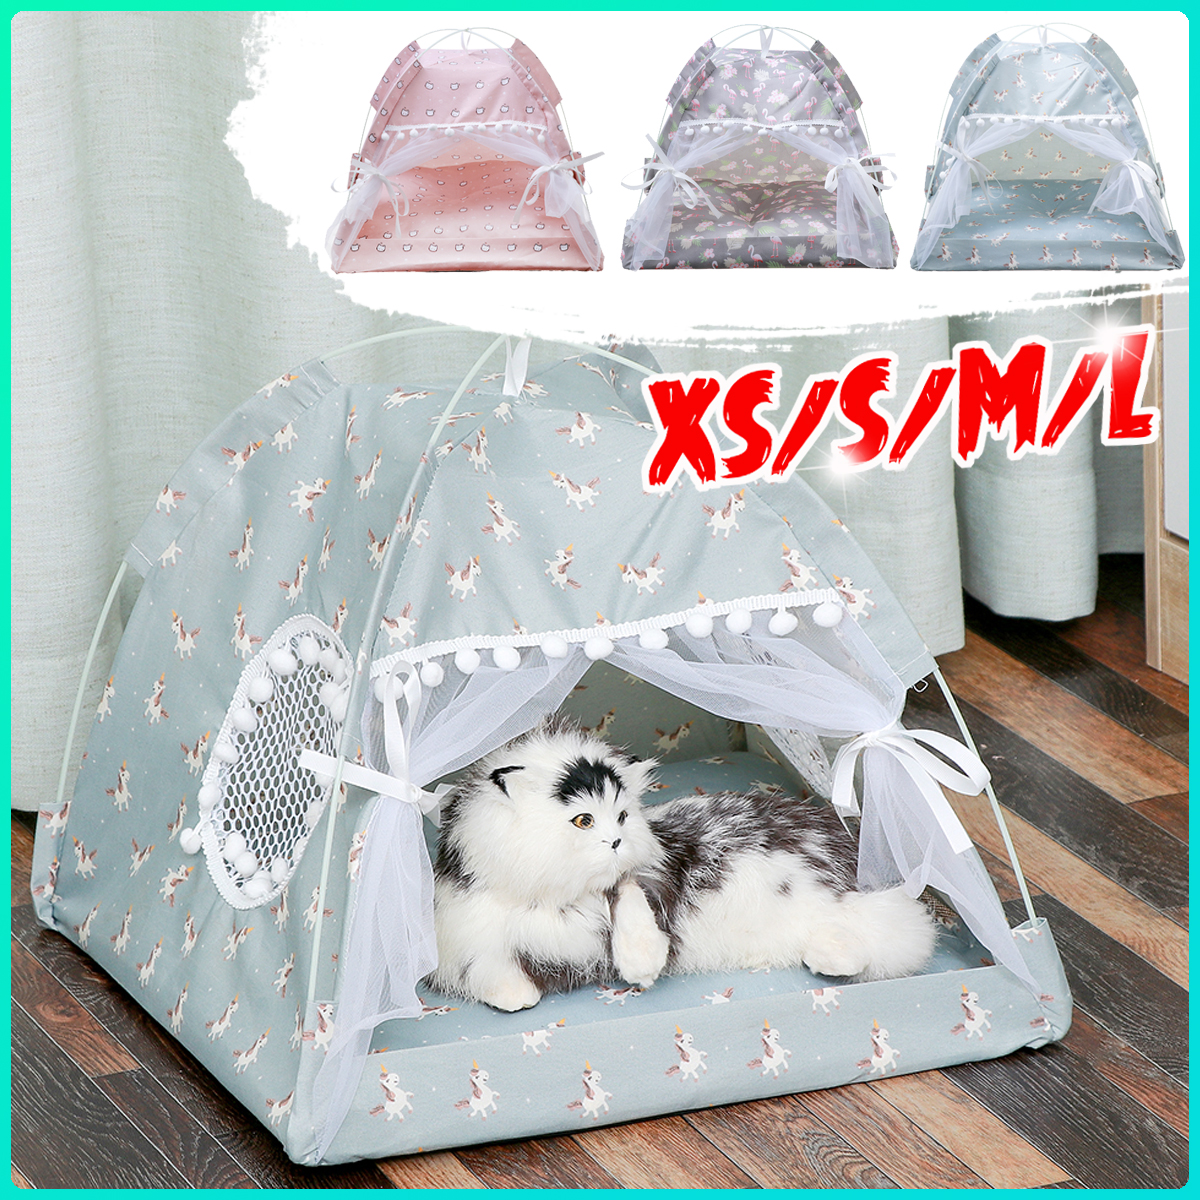 Pet-Tent-Cat-Bed-Puppy-House-Cushion-Pad-Bed-Flamingo-Pattern-Indo-1825833-2